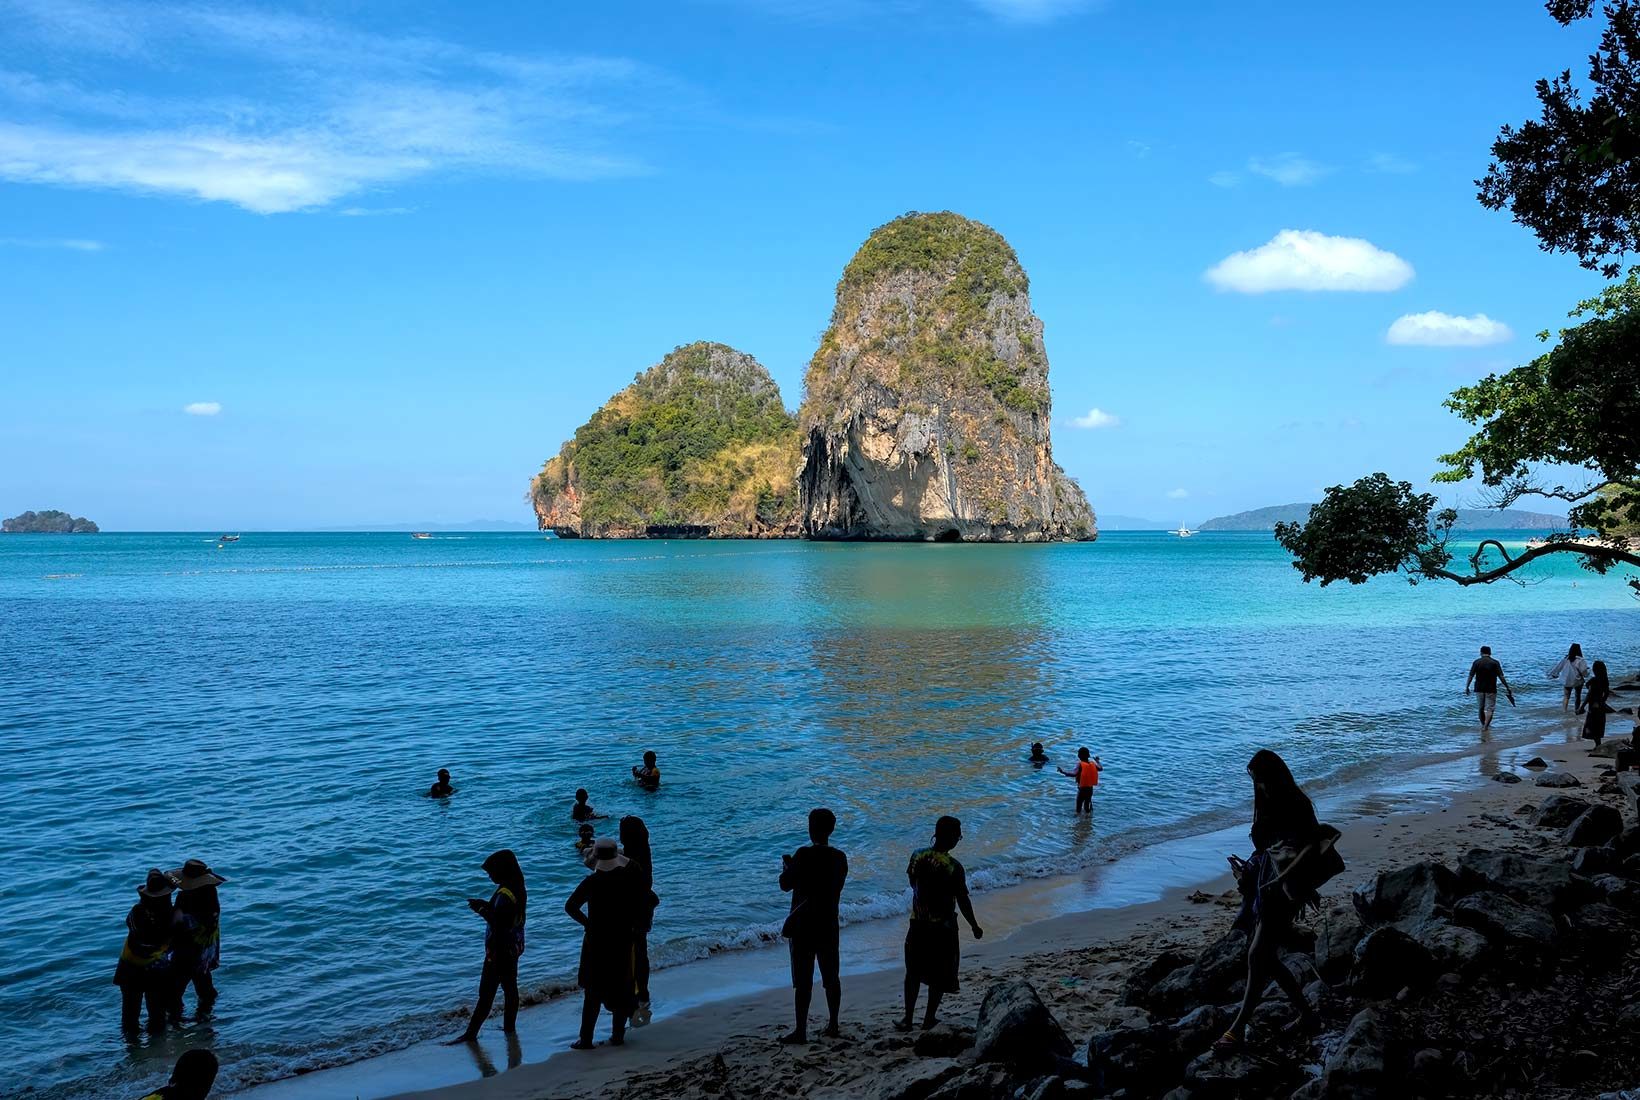 Happy Island, just offshore from Phra Nang Cave on the eastern side of the Railay Beach peninsula